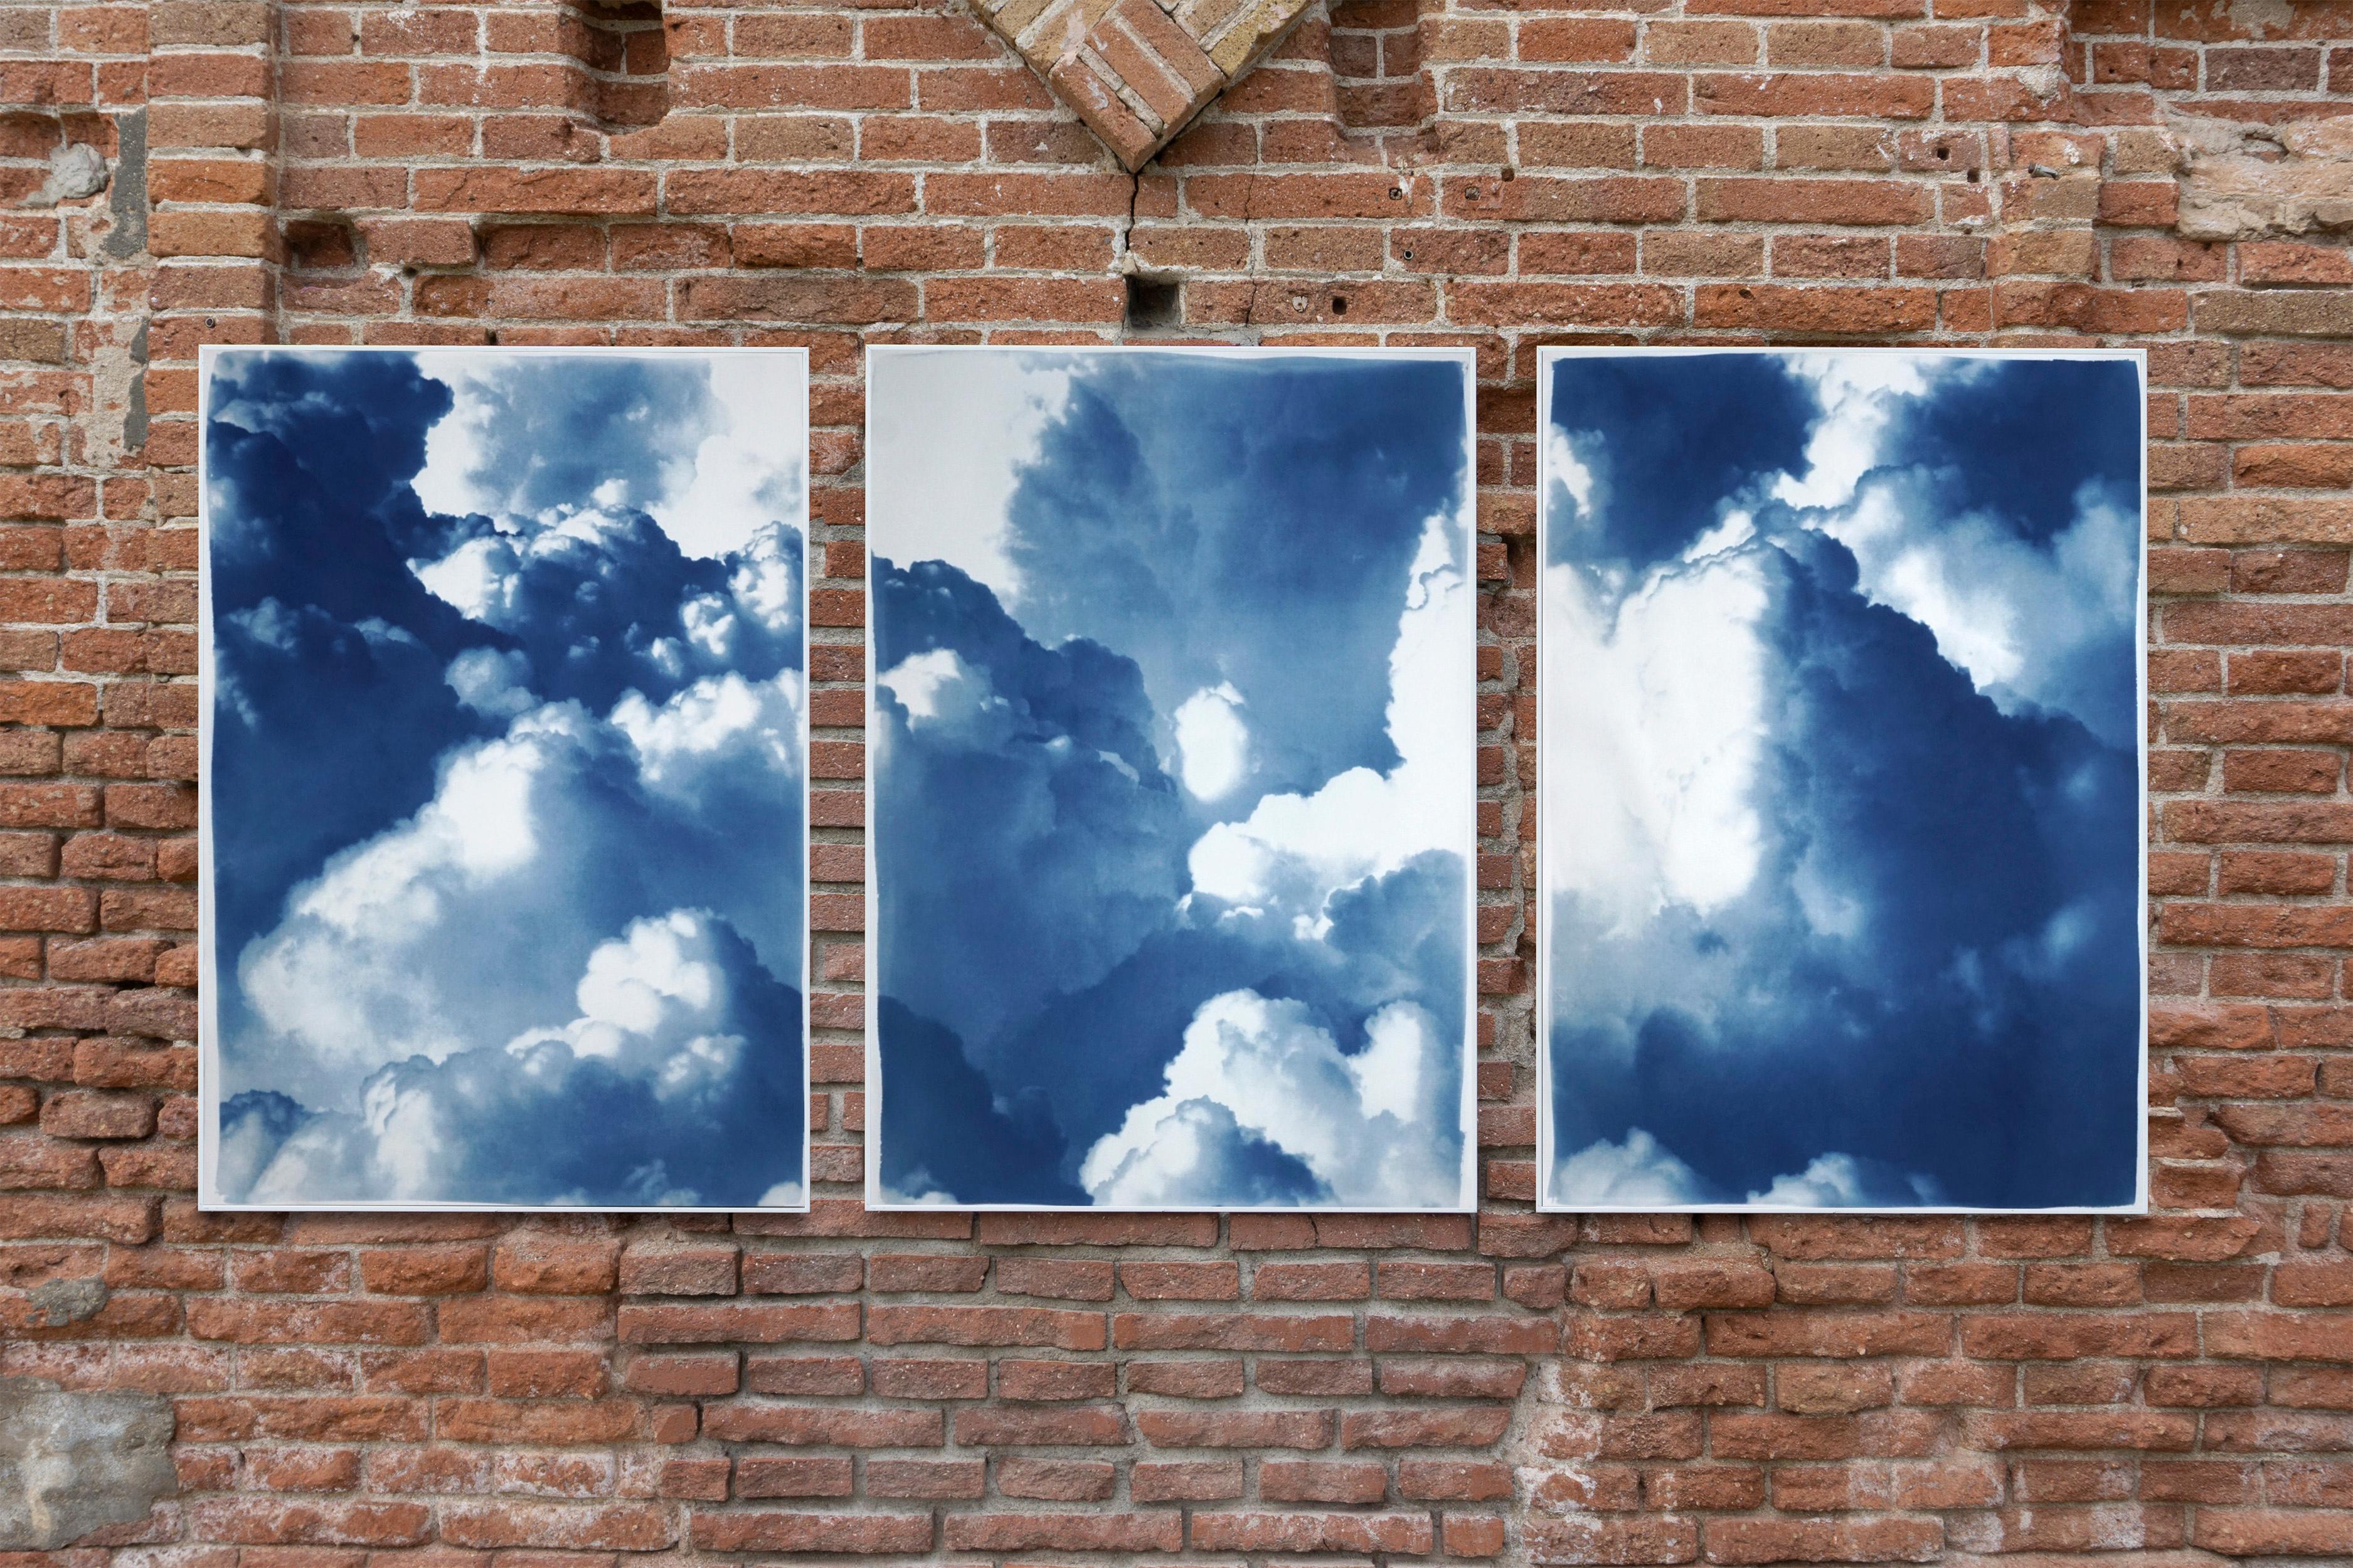 This is an exclusive handprinted limited edition cyanotype of gorgeous rolling clouds. 

Details:
+ Title: Dense Rolling Clouds
+ Year: 2021
+ Edition Size: 100
+ Stamped and Certificate of Authenticity provided
+ Measurements : 100x210 cm (40 x 84